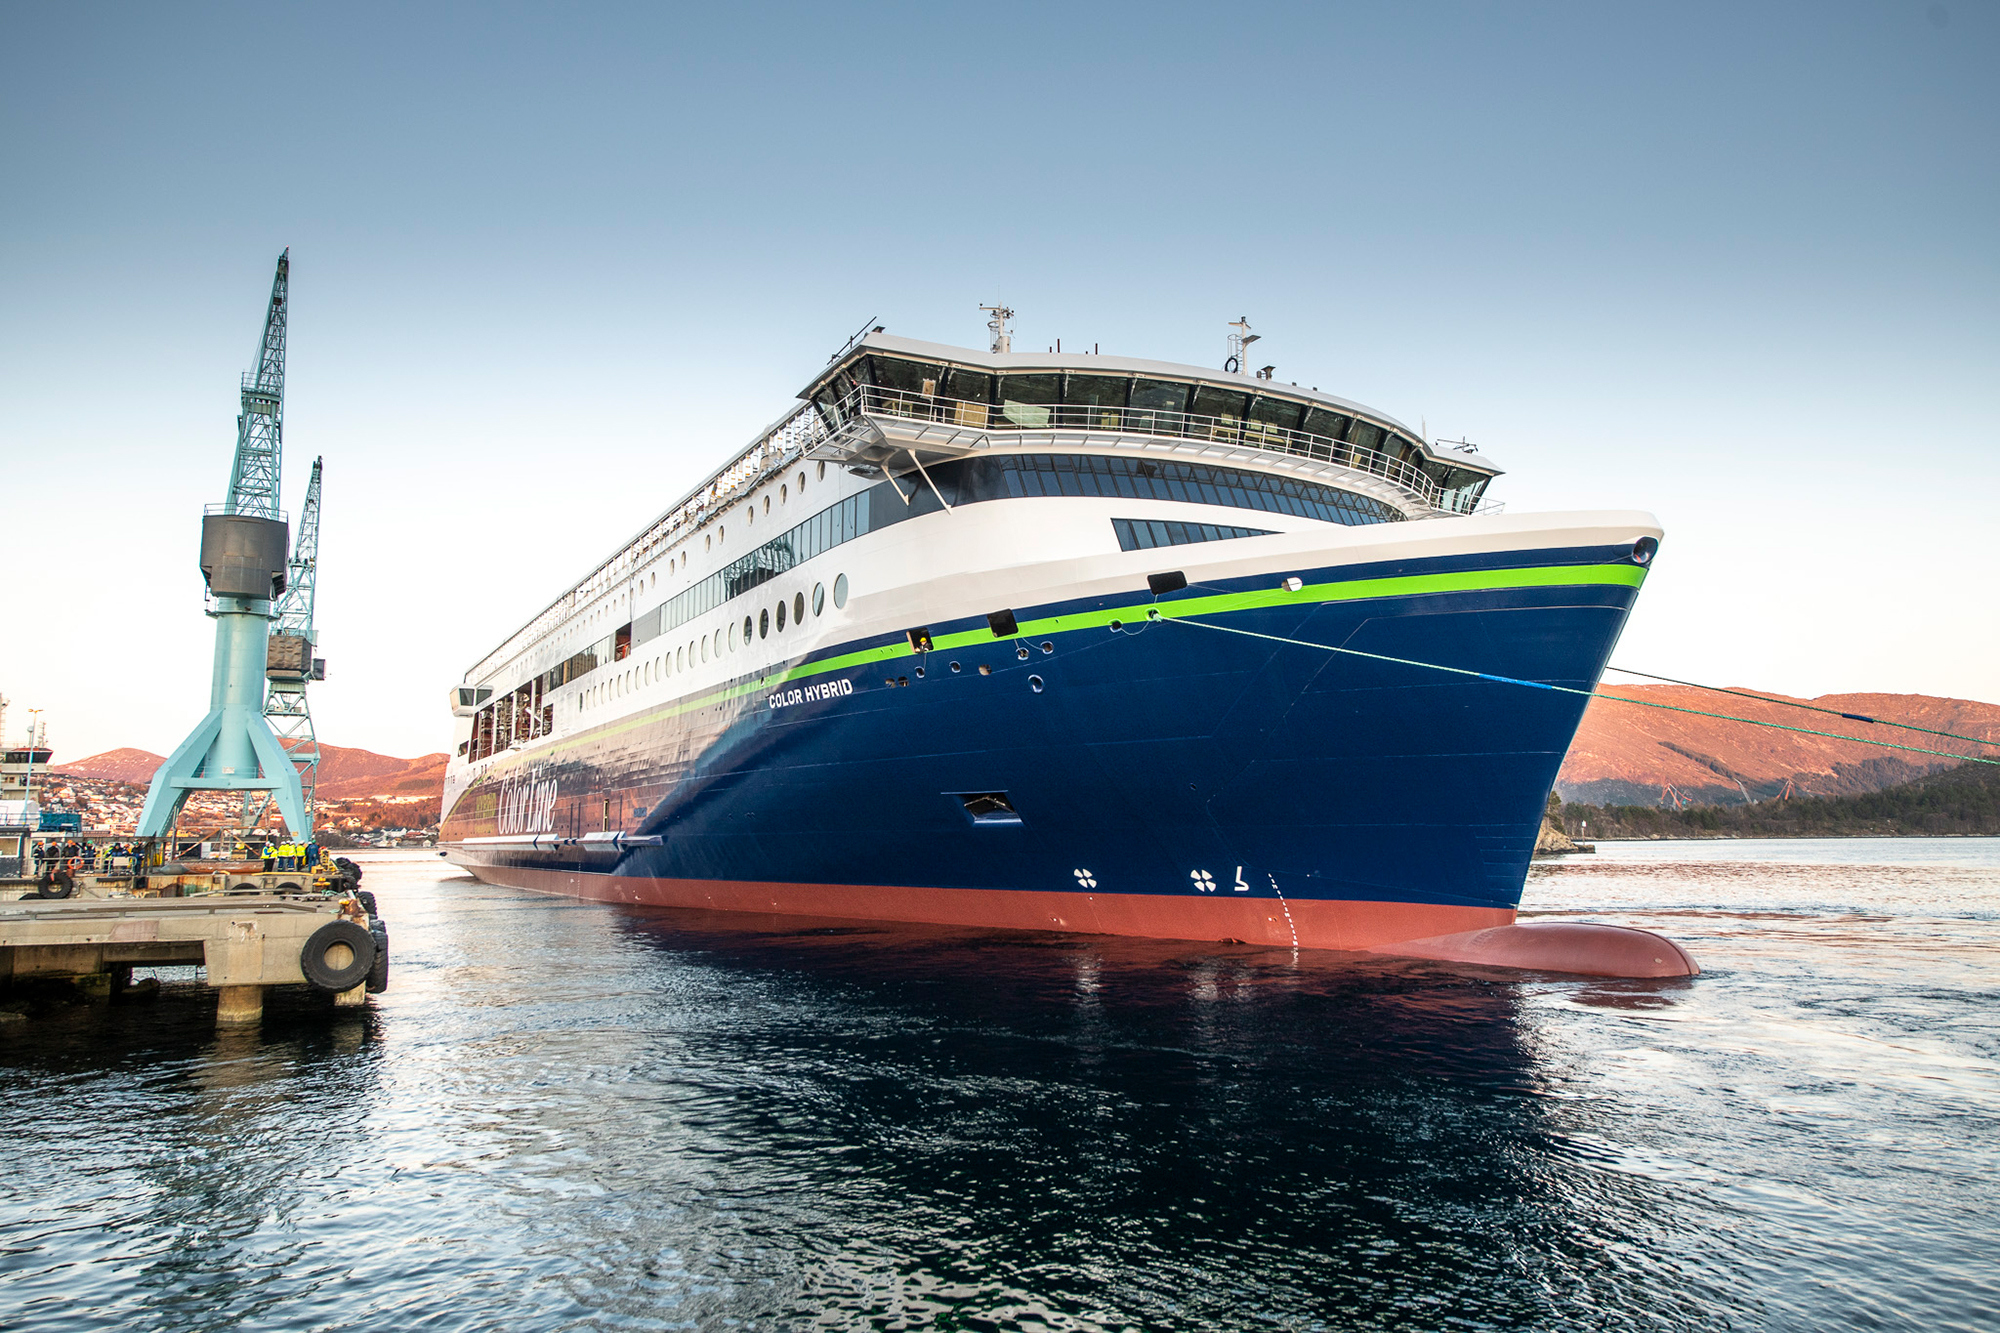 The vessel in full daylight, about to get positioned quayside. (Photo: Per Eide Studio)